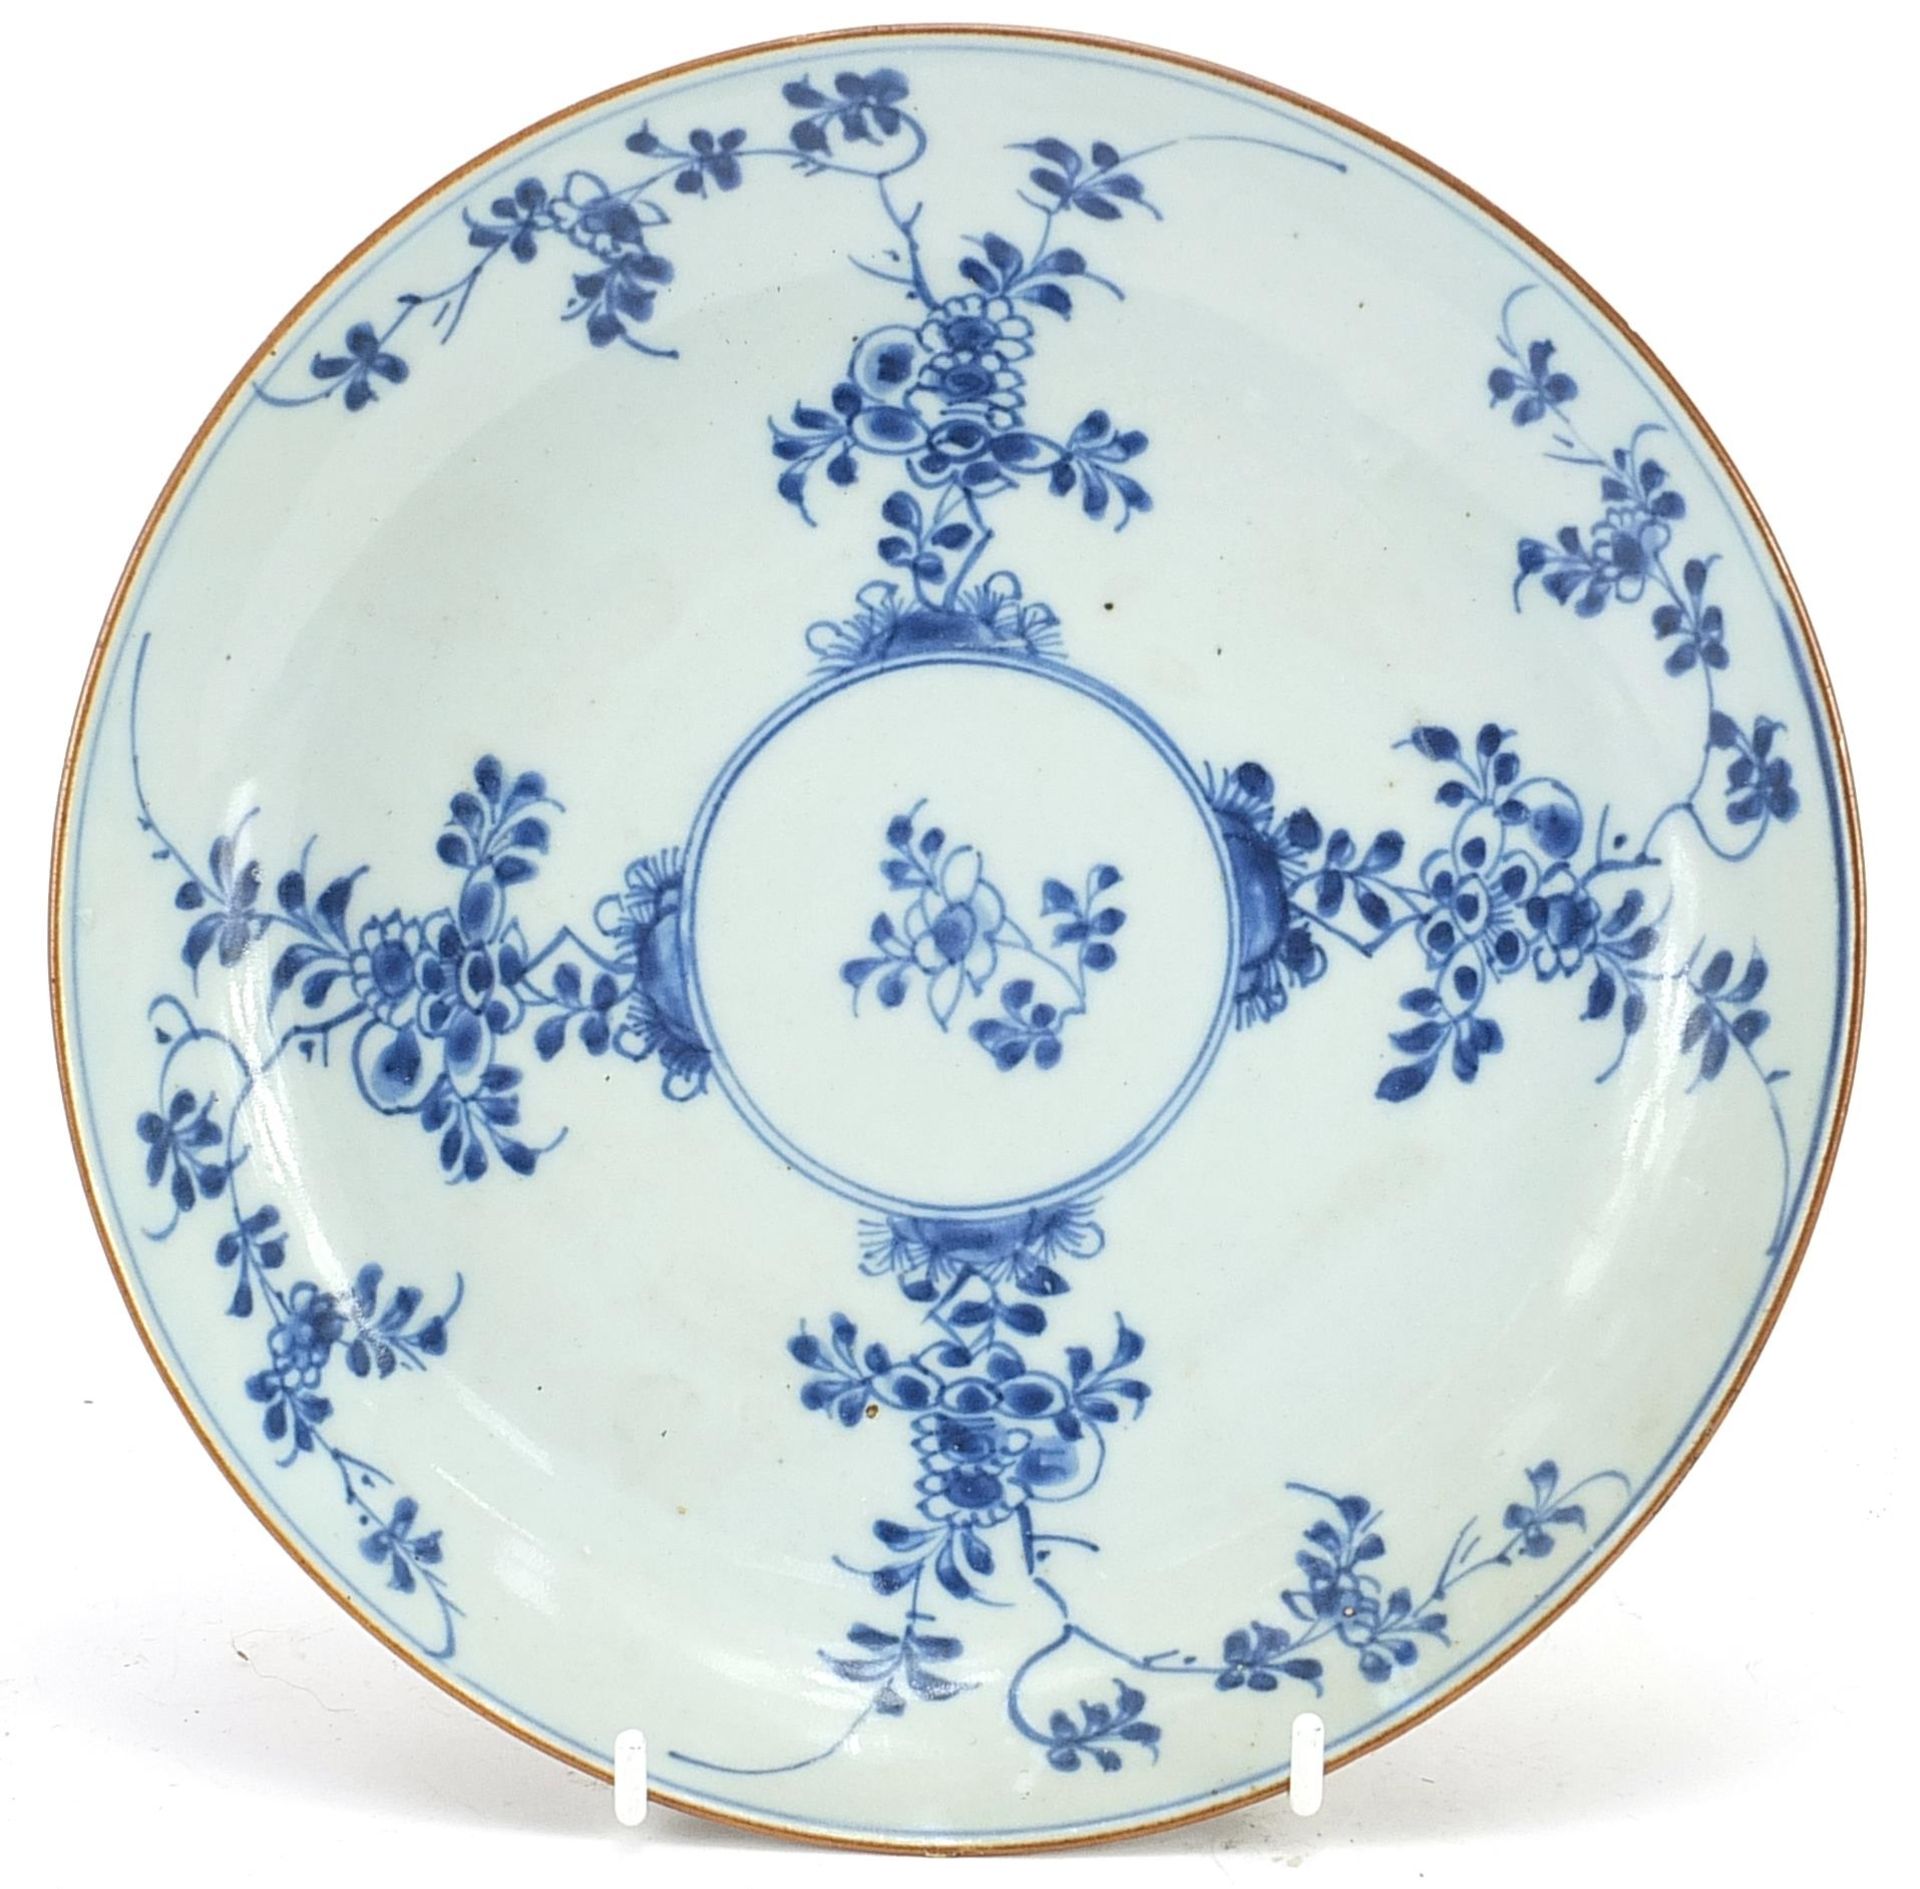 Chinese blue and white porcelain shallow dish hand painted with flowers, 22cm in diameter